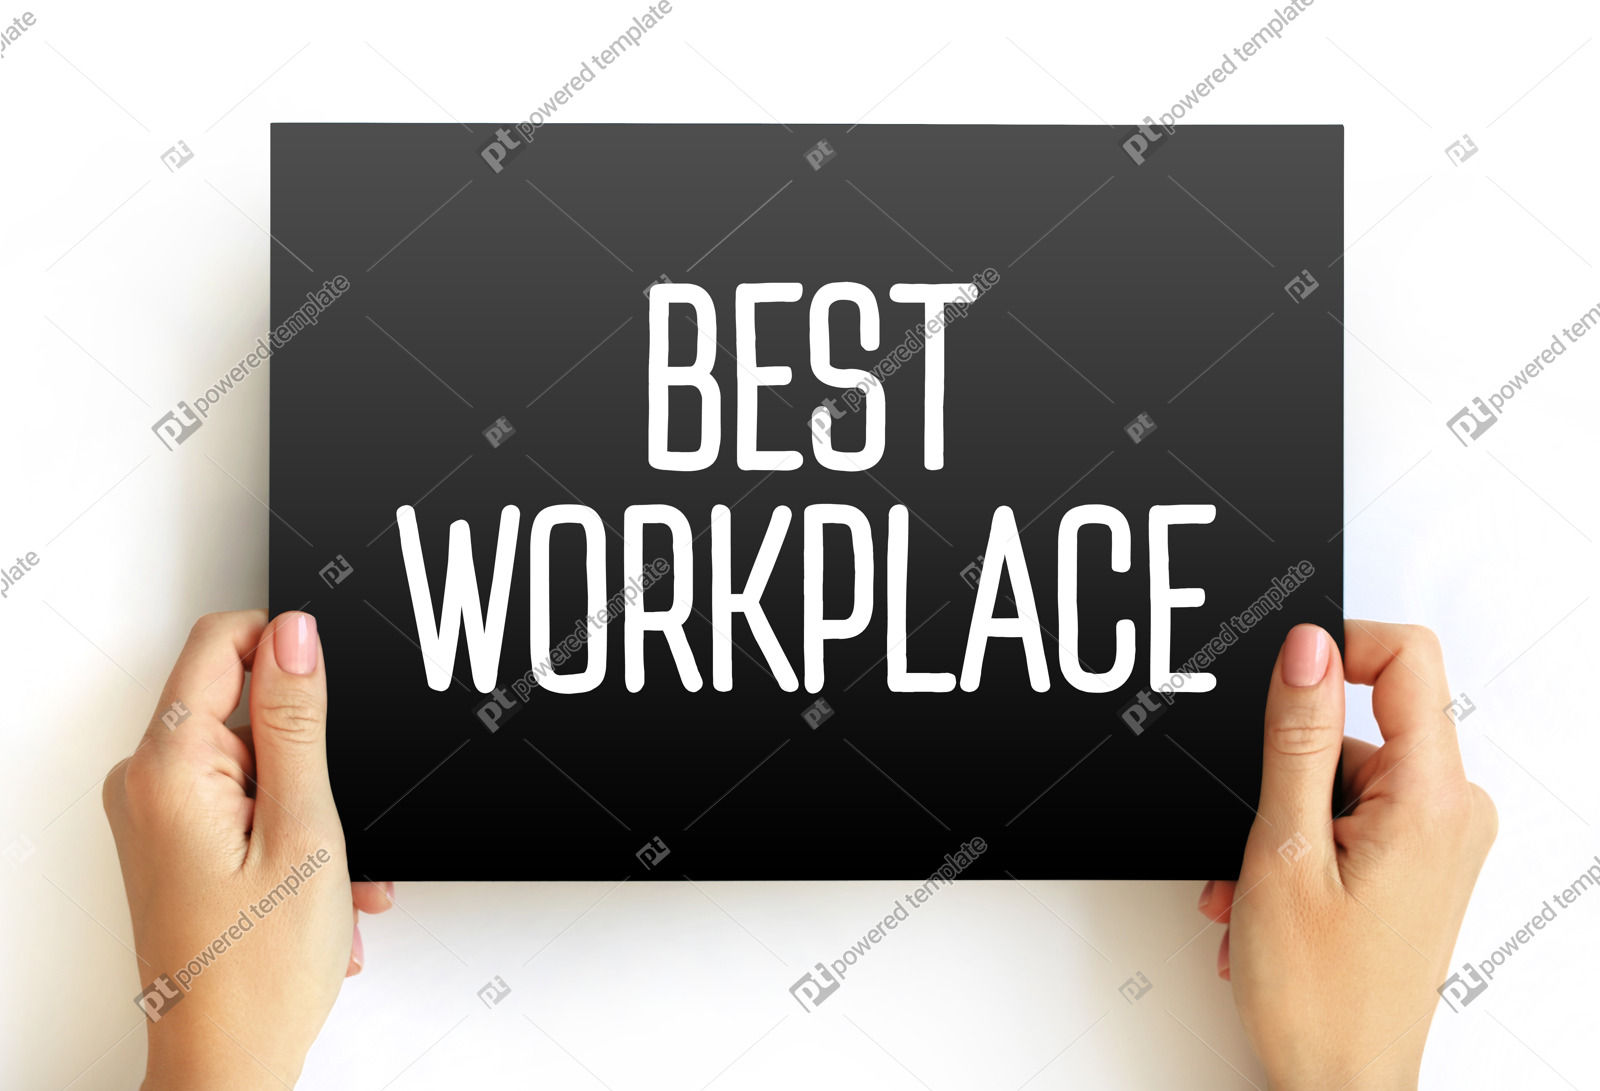 Best Workplace Text on Card Concept Background Stock Photo 98274